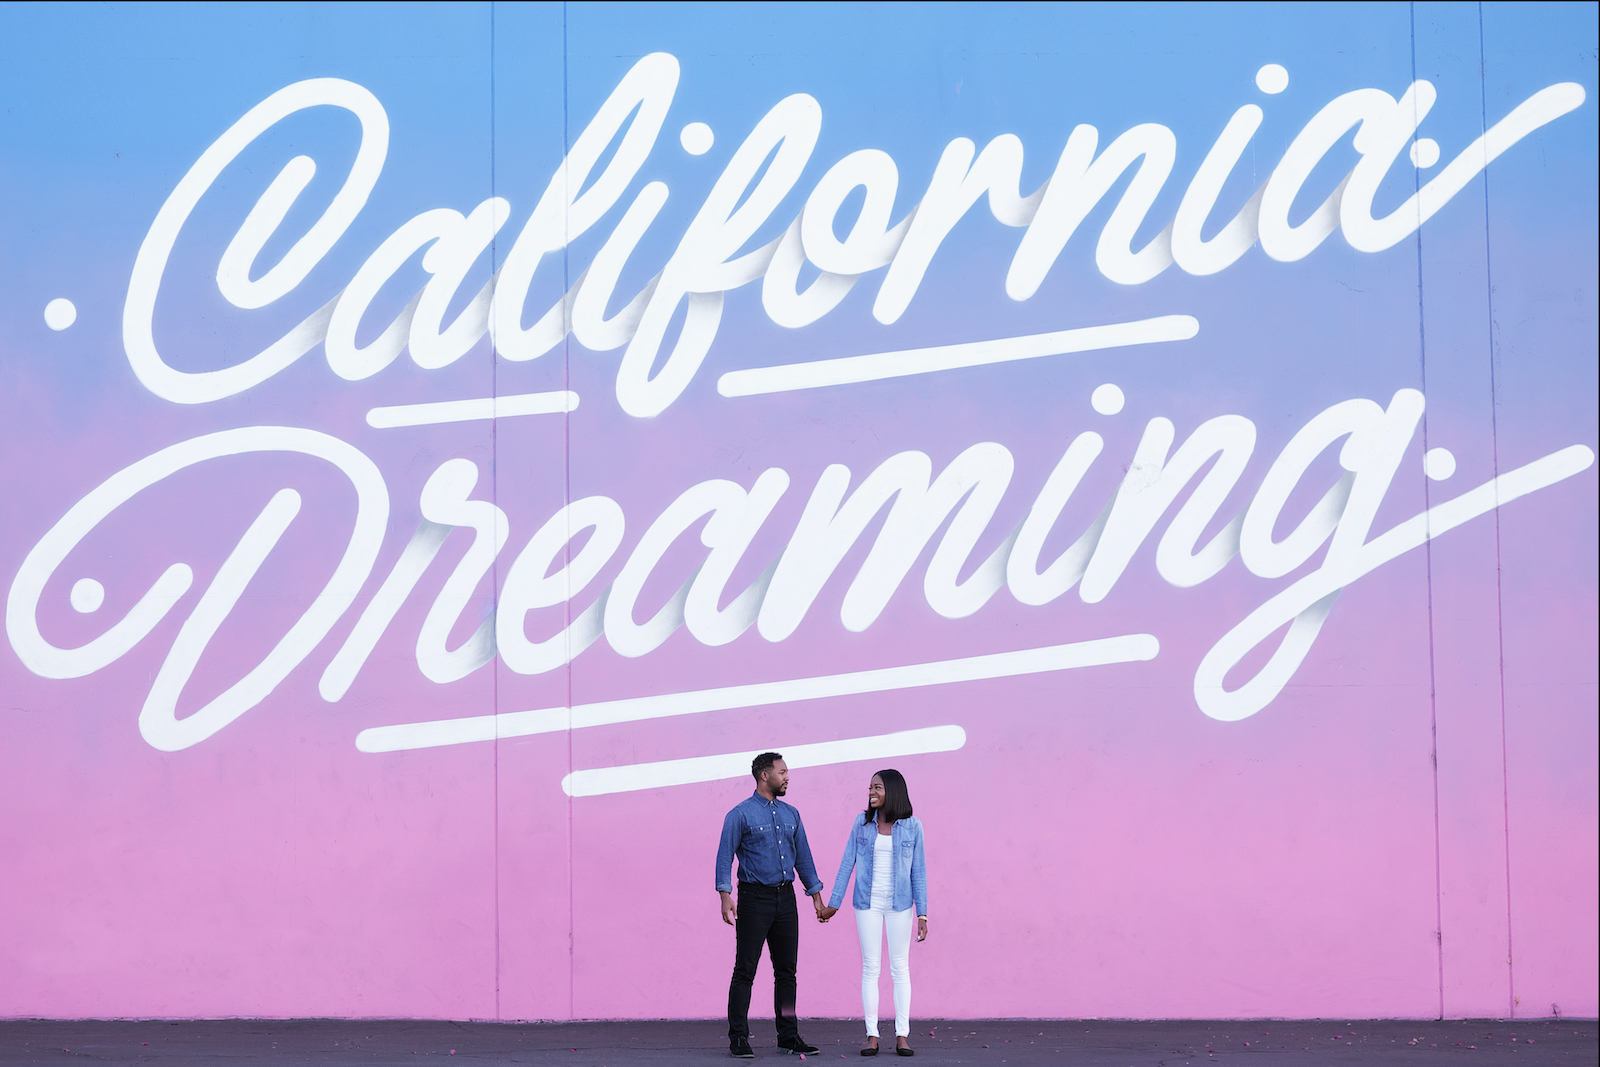 Los Angeles - Couple Portrait - Smog Shoppe - California Dreaming Mural - Holiday